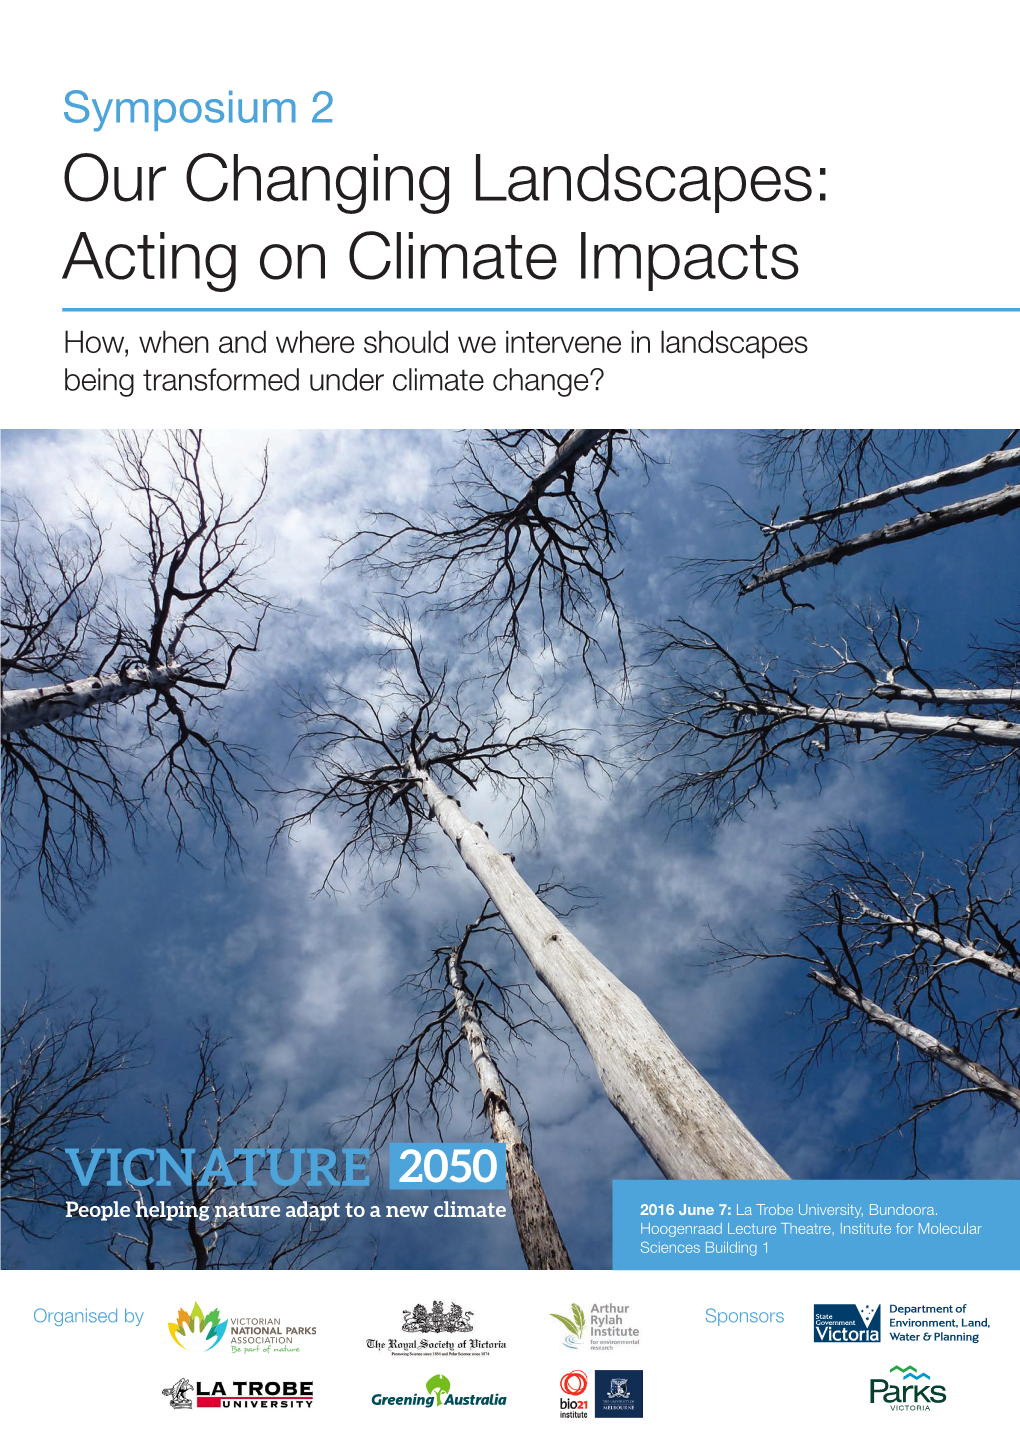 Our Changing Landscapes: Acting on Climate Impacts